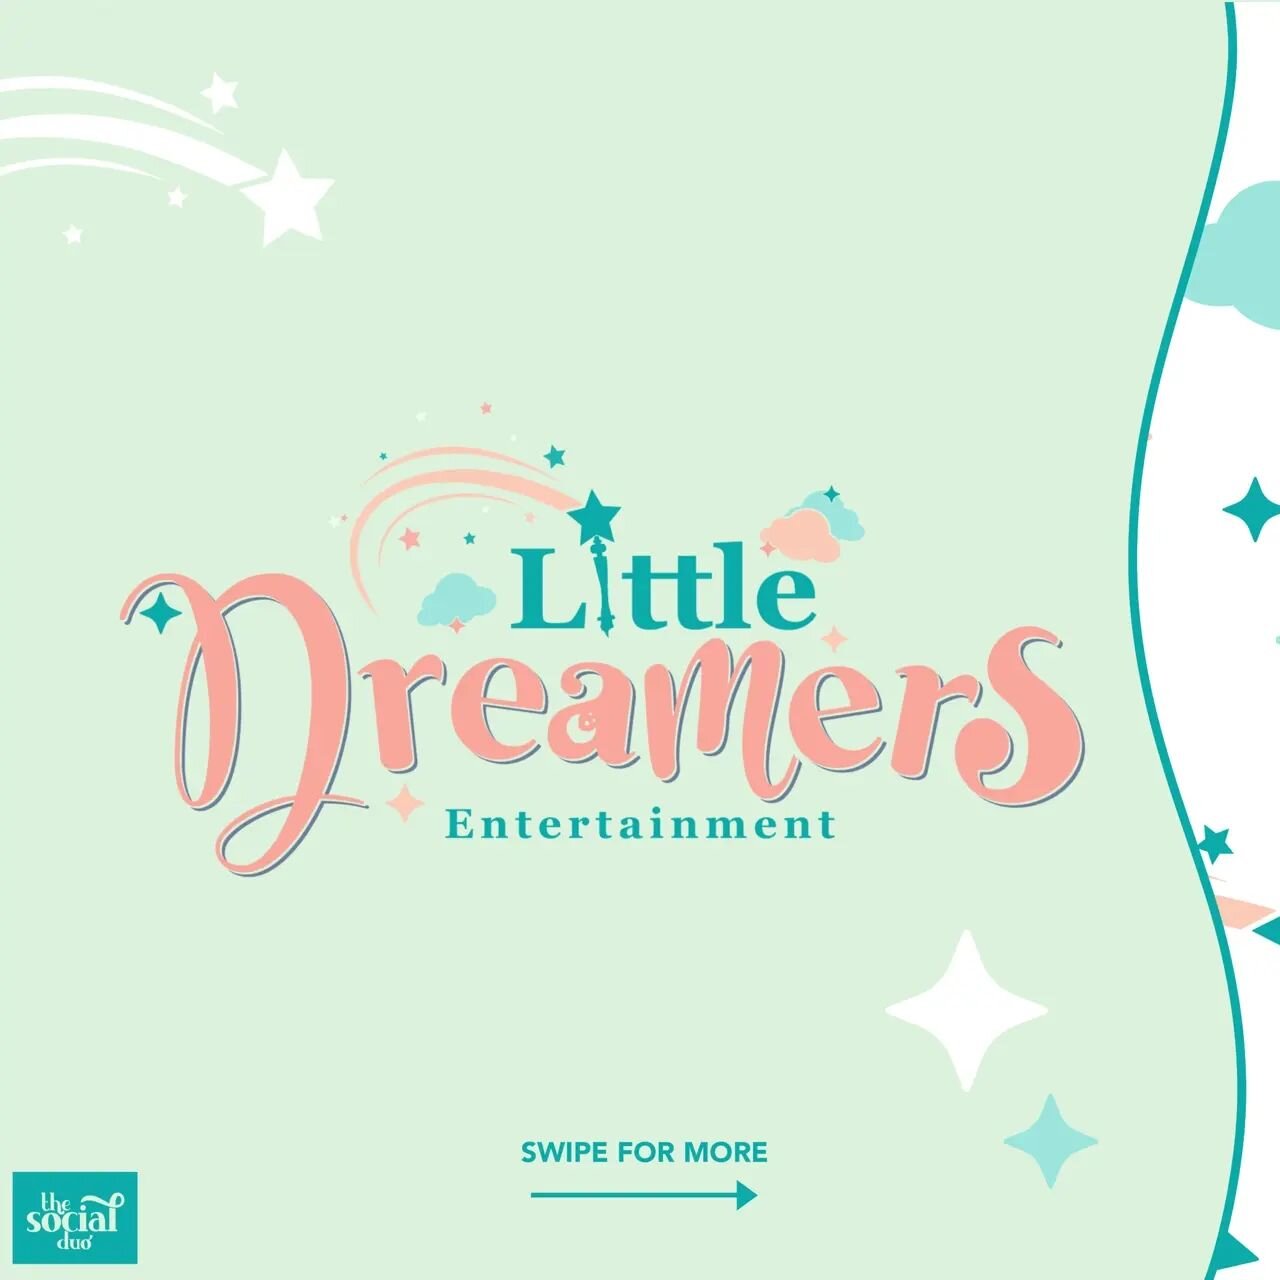 Who said moon and stars belong only in the night sky? With our design magic, they've found a home nestled in the letter A of the logo for Little Dreamers Entertainment.✨️

Swipe across to see the magic within their branding. 

What Cinderella's fairy